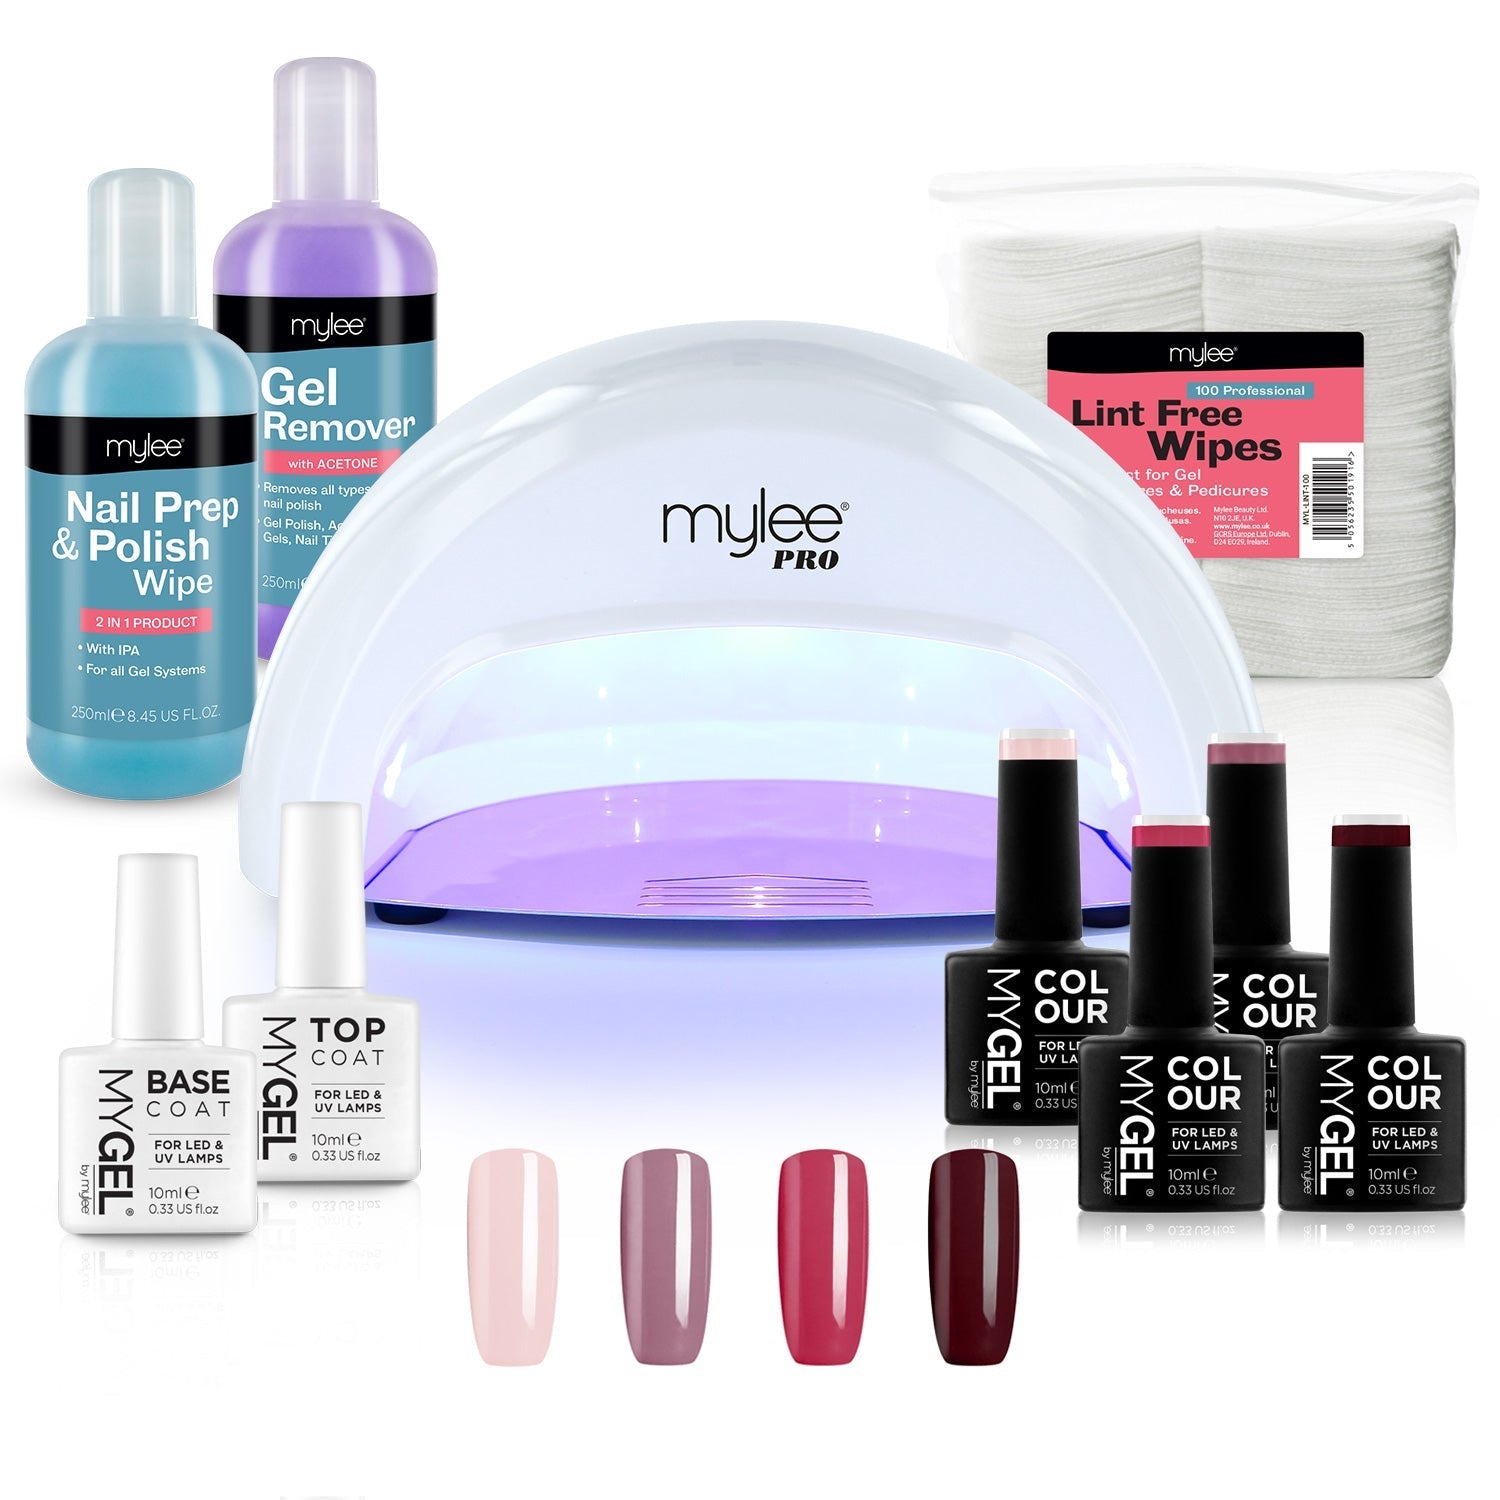 Mylee White Convex Curing Lamp Kit w/ Gel Nail Polish Essentials (Worth 104.50) - Long Lasting At Home Manicure/Pedicure